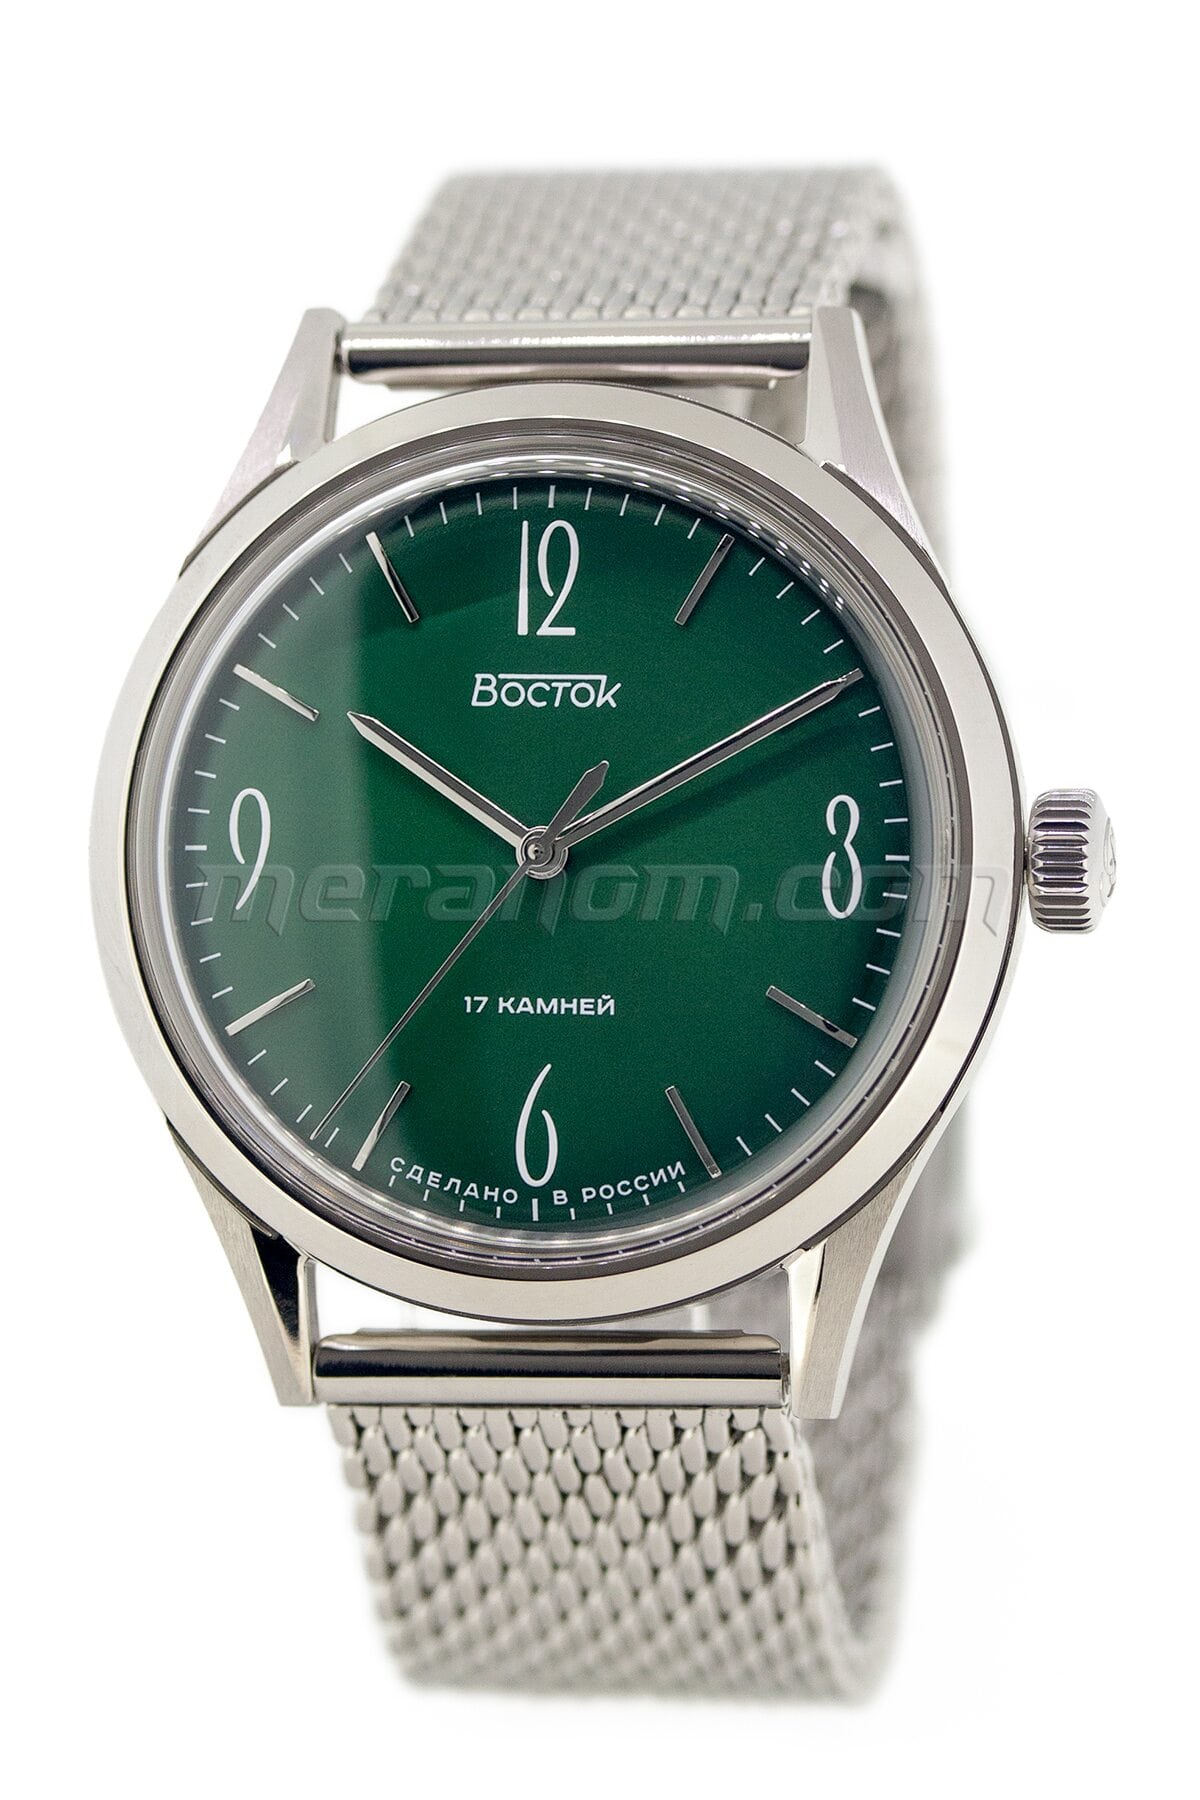 Vostok classica with silver steel strap and green dial